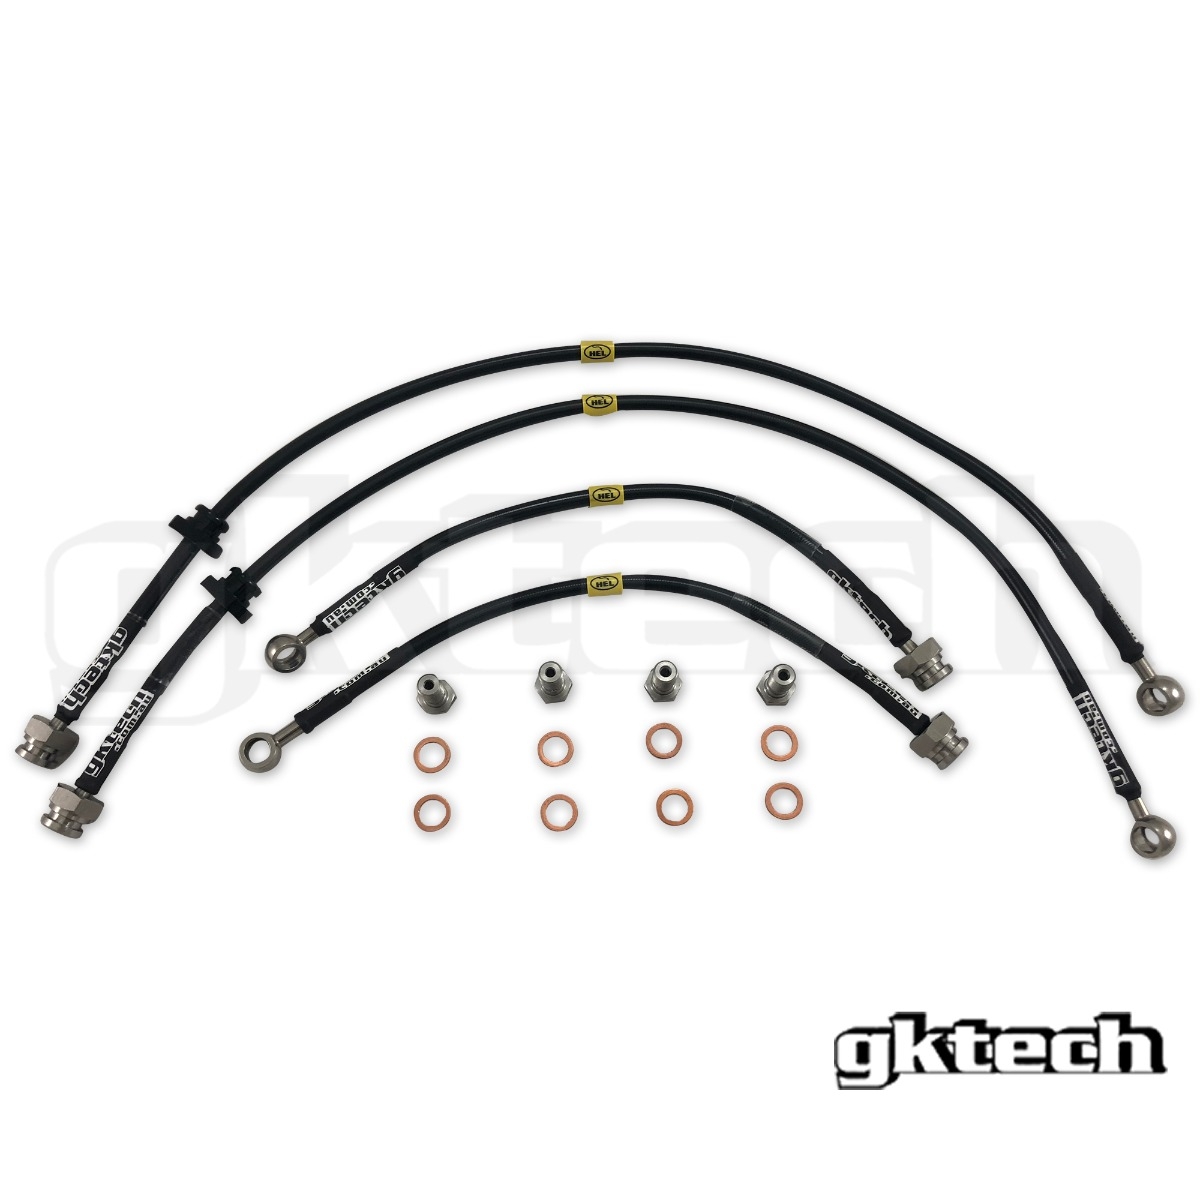 GKTech Braided Brake Lines (Front & Rear Set) - Nissan Silvia 240SX S14, S15